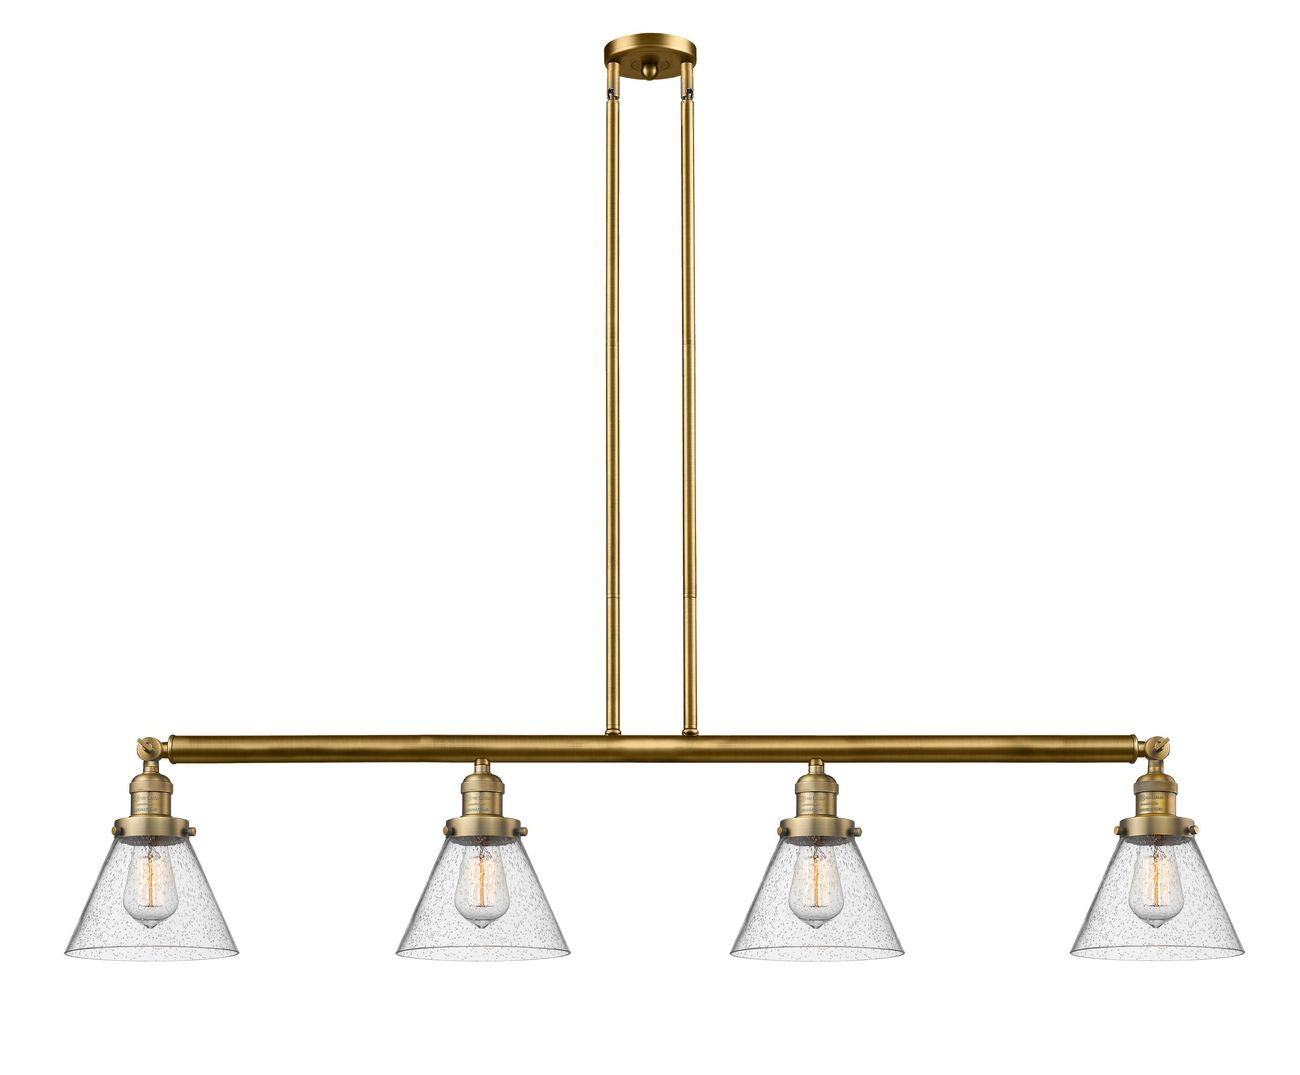 214-BB-G44 4-Light 52.375" Brushed Brass Island Light - Seedy Large Cone Glass - LED Bulb - Dimmensions: 52.375 x 7.75 x 10<br>Minimum Height : 20.25<br>Maximum Height : 44.25 - Sloped Ceiling Compatible: Yes